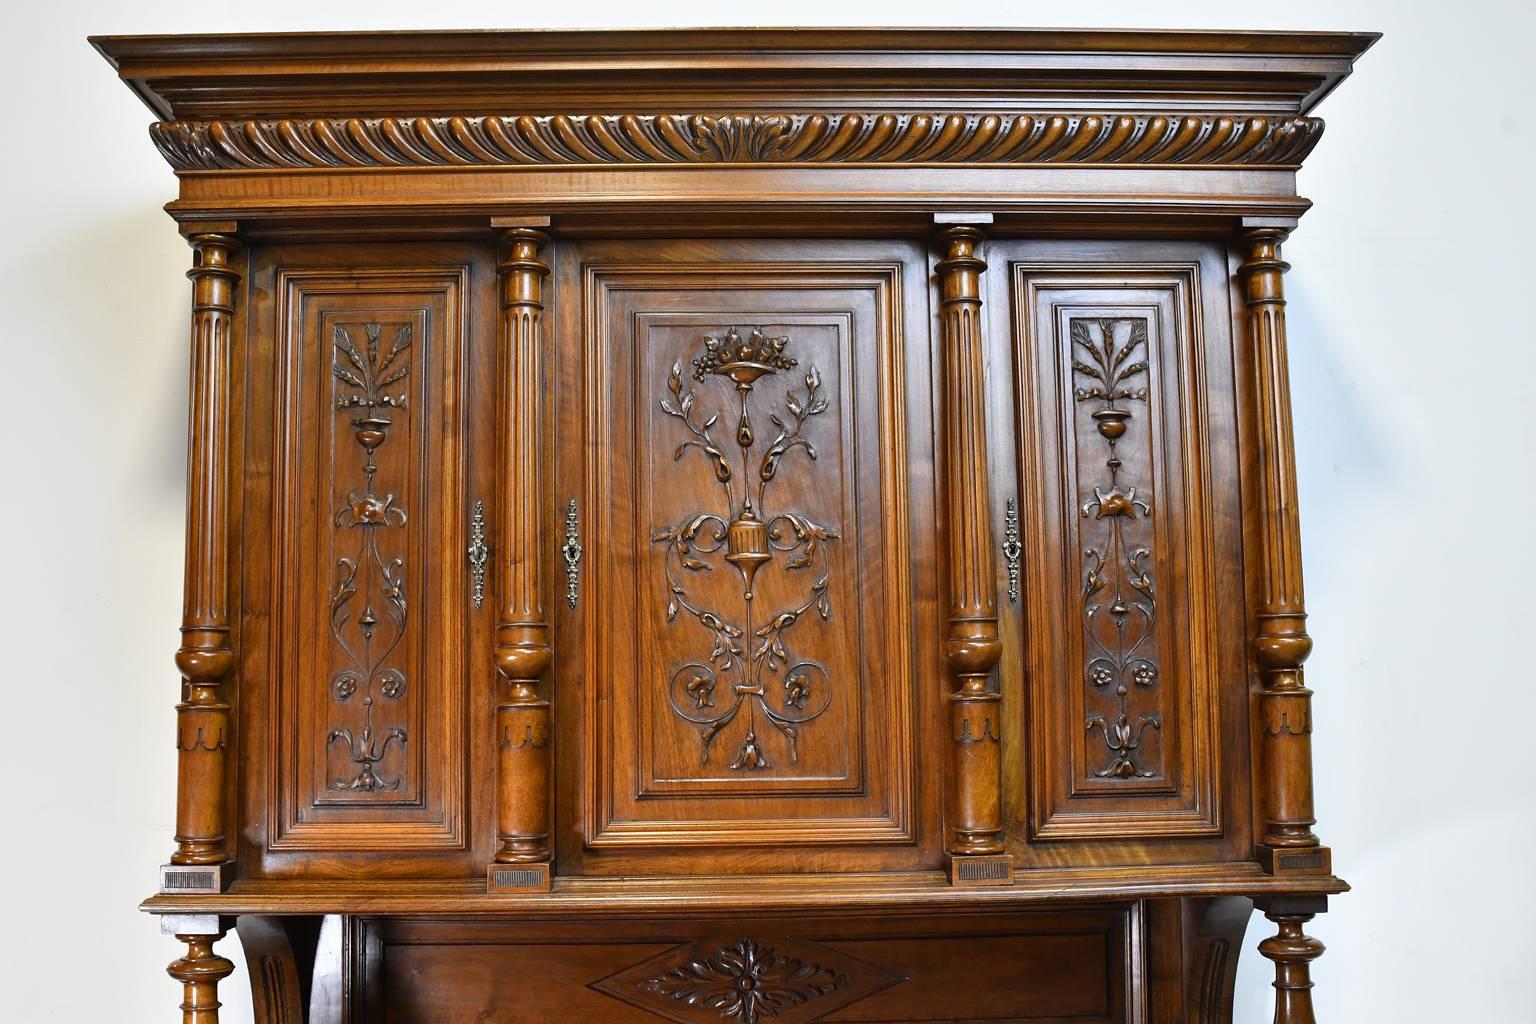 A Belle Époque French buffet a deux corps in a medium, brown-colored walnut. This very beautiful Renaissance-style buffet features exceptional carvings of urns, flowers & foliage that are carved directly from the solid walnut panels (not applied),